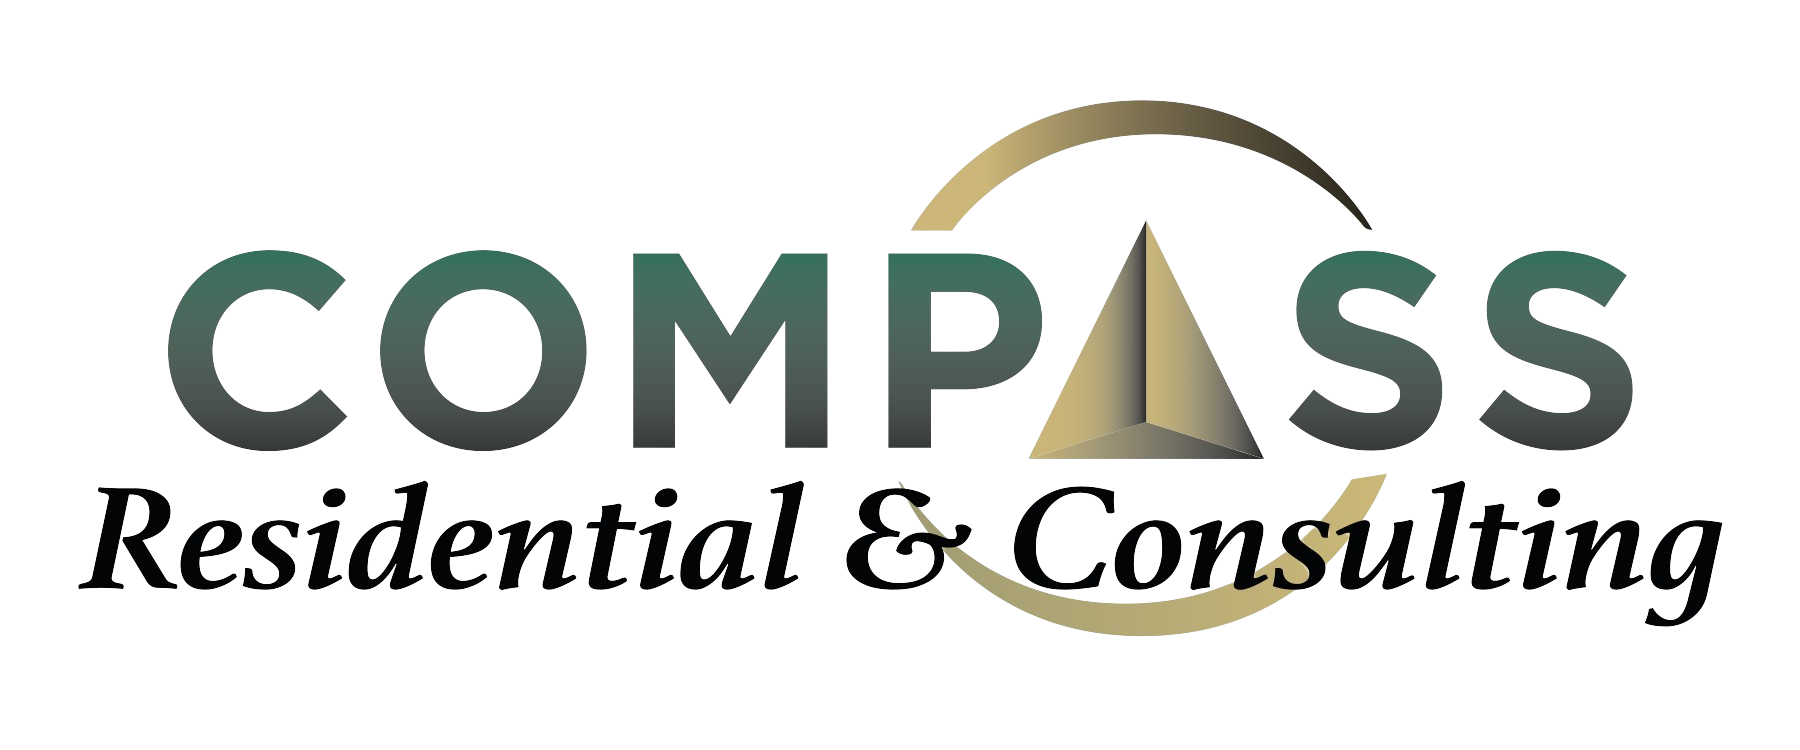 Incident Reporting - Compass Care